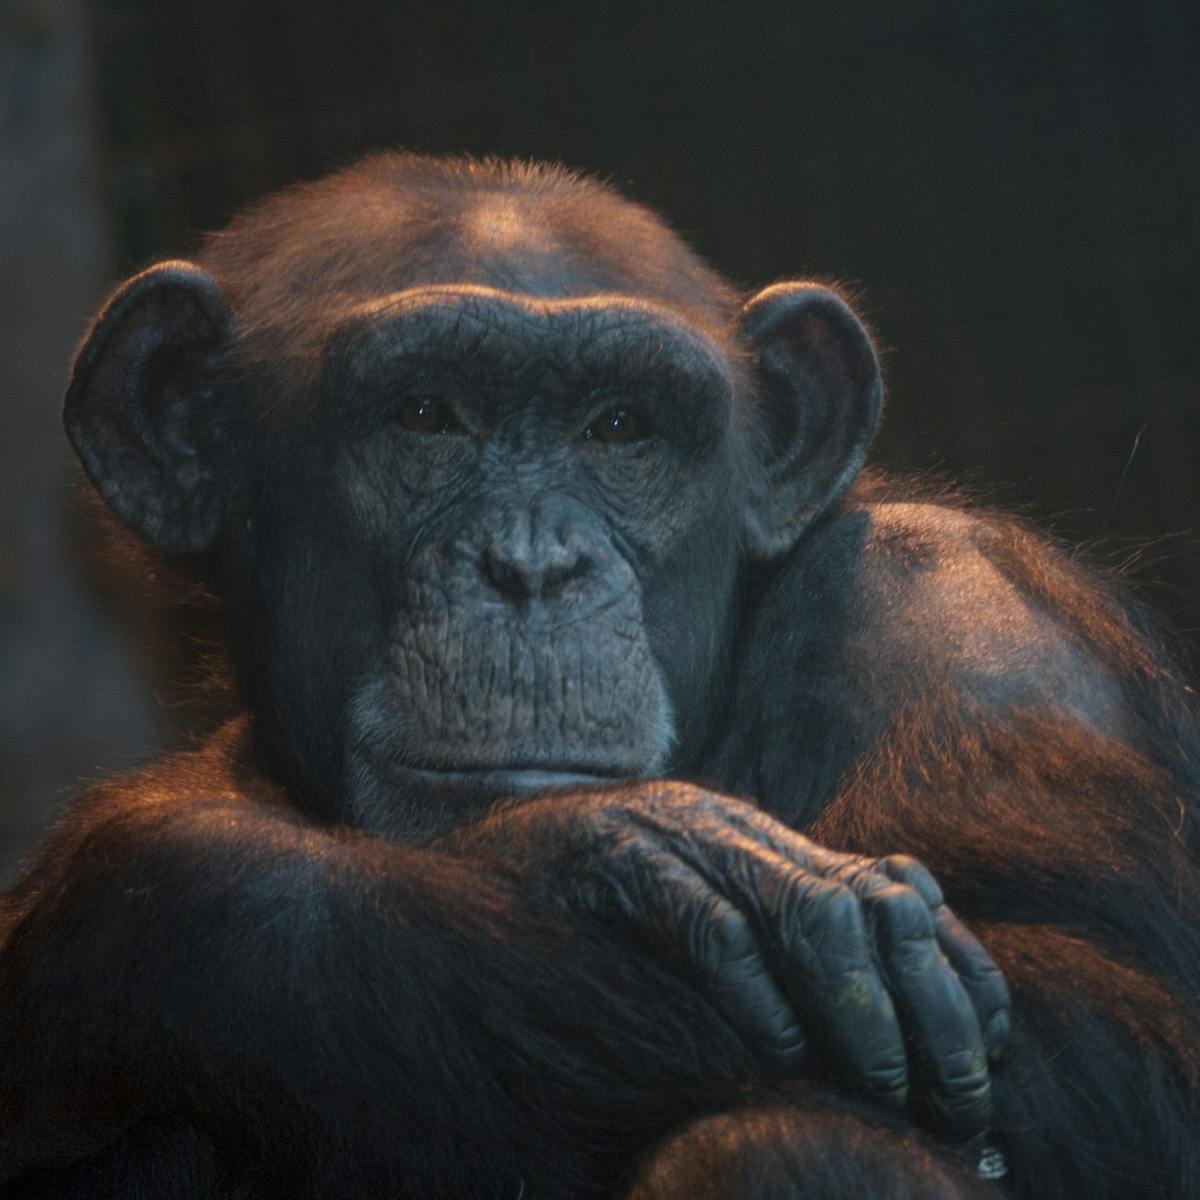 Climbing the tree: the case for chimpanzee 'personhood'